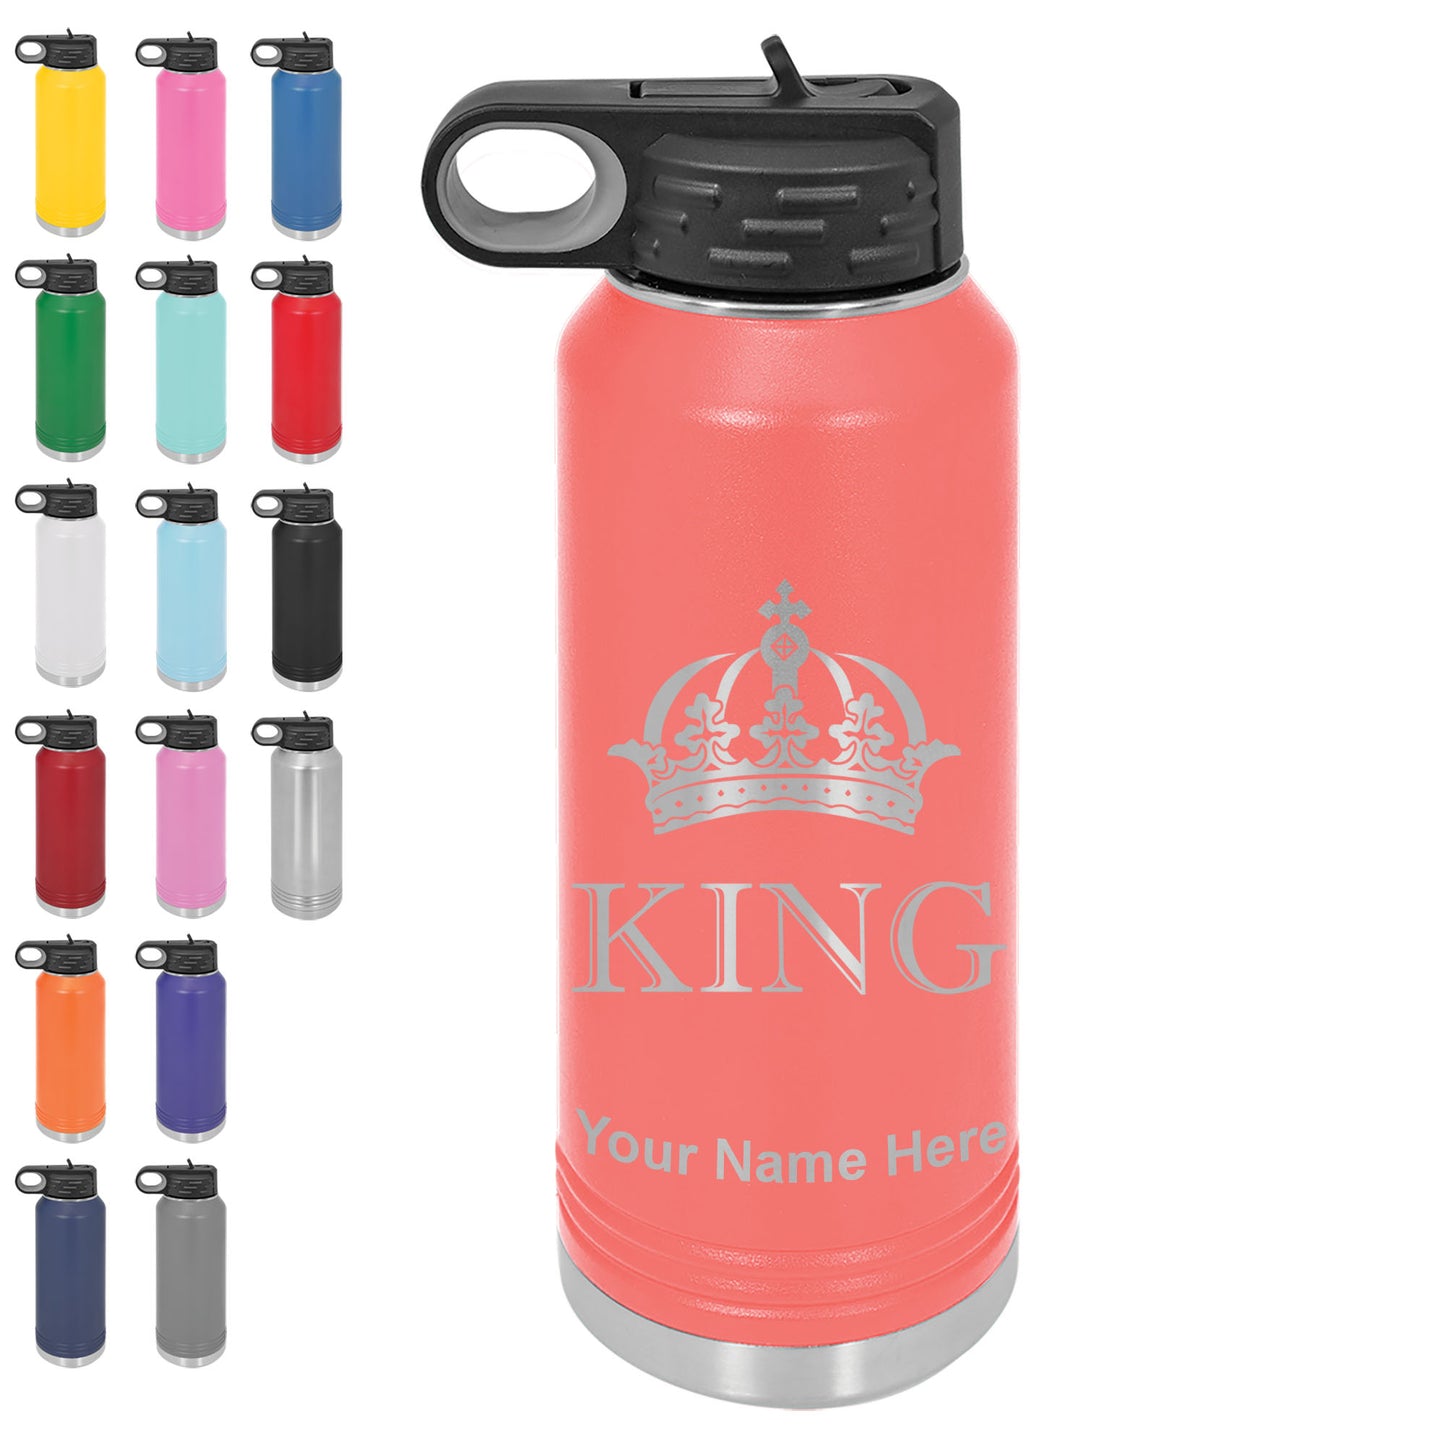 LaserGram 32oz Double Wall Flip Top Water Bottle with Straw, King Crown, Personalized Engraving Included